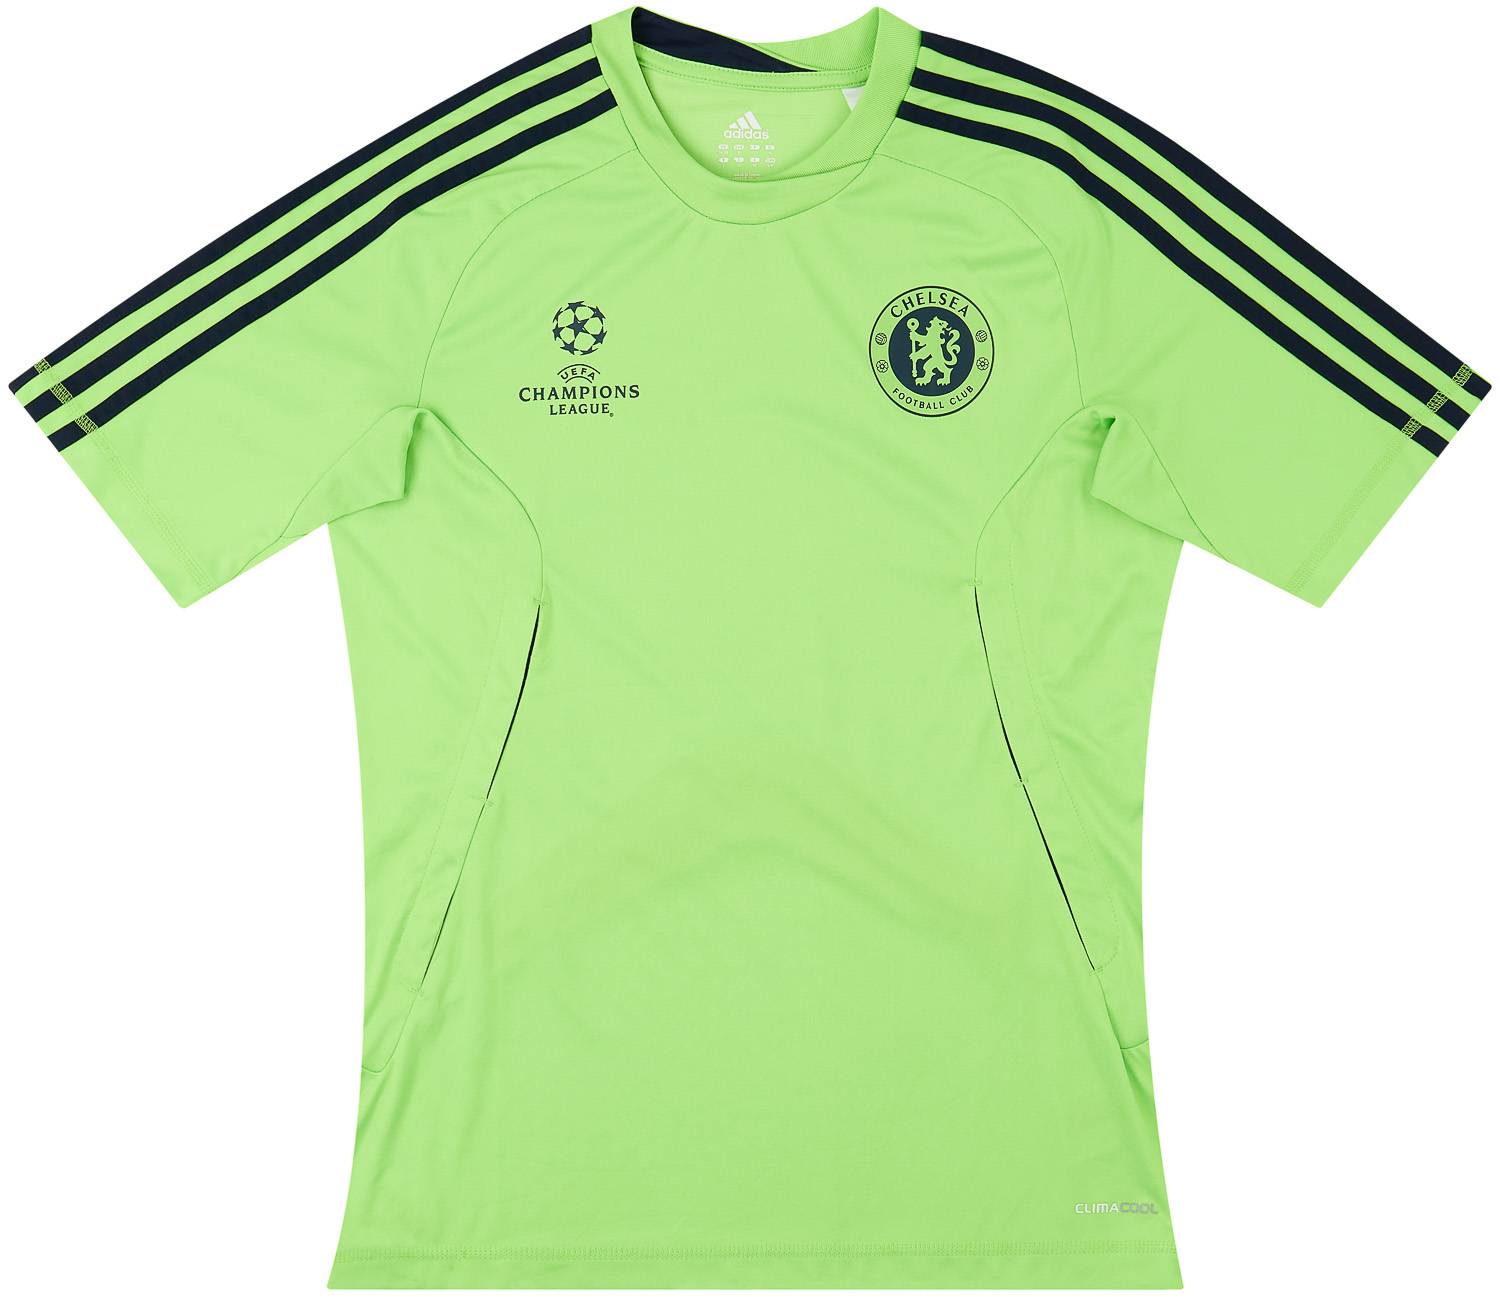 2010-11 Chelsea adidas Training Shirt (Excellent) S